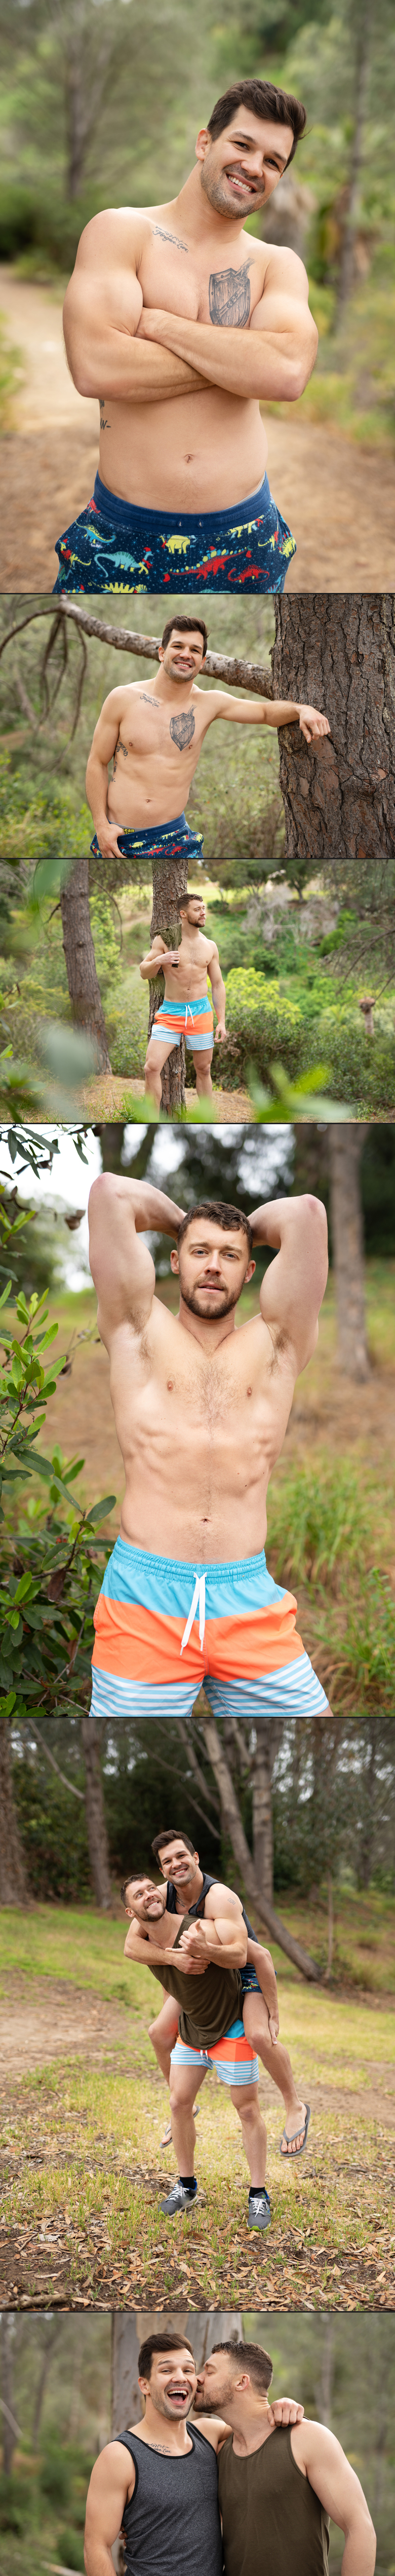 Brysen Bottoms For Justin at SeanCody